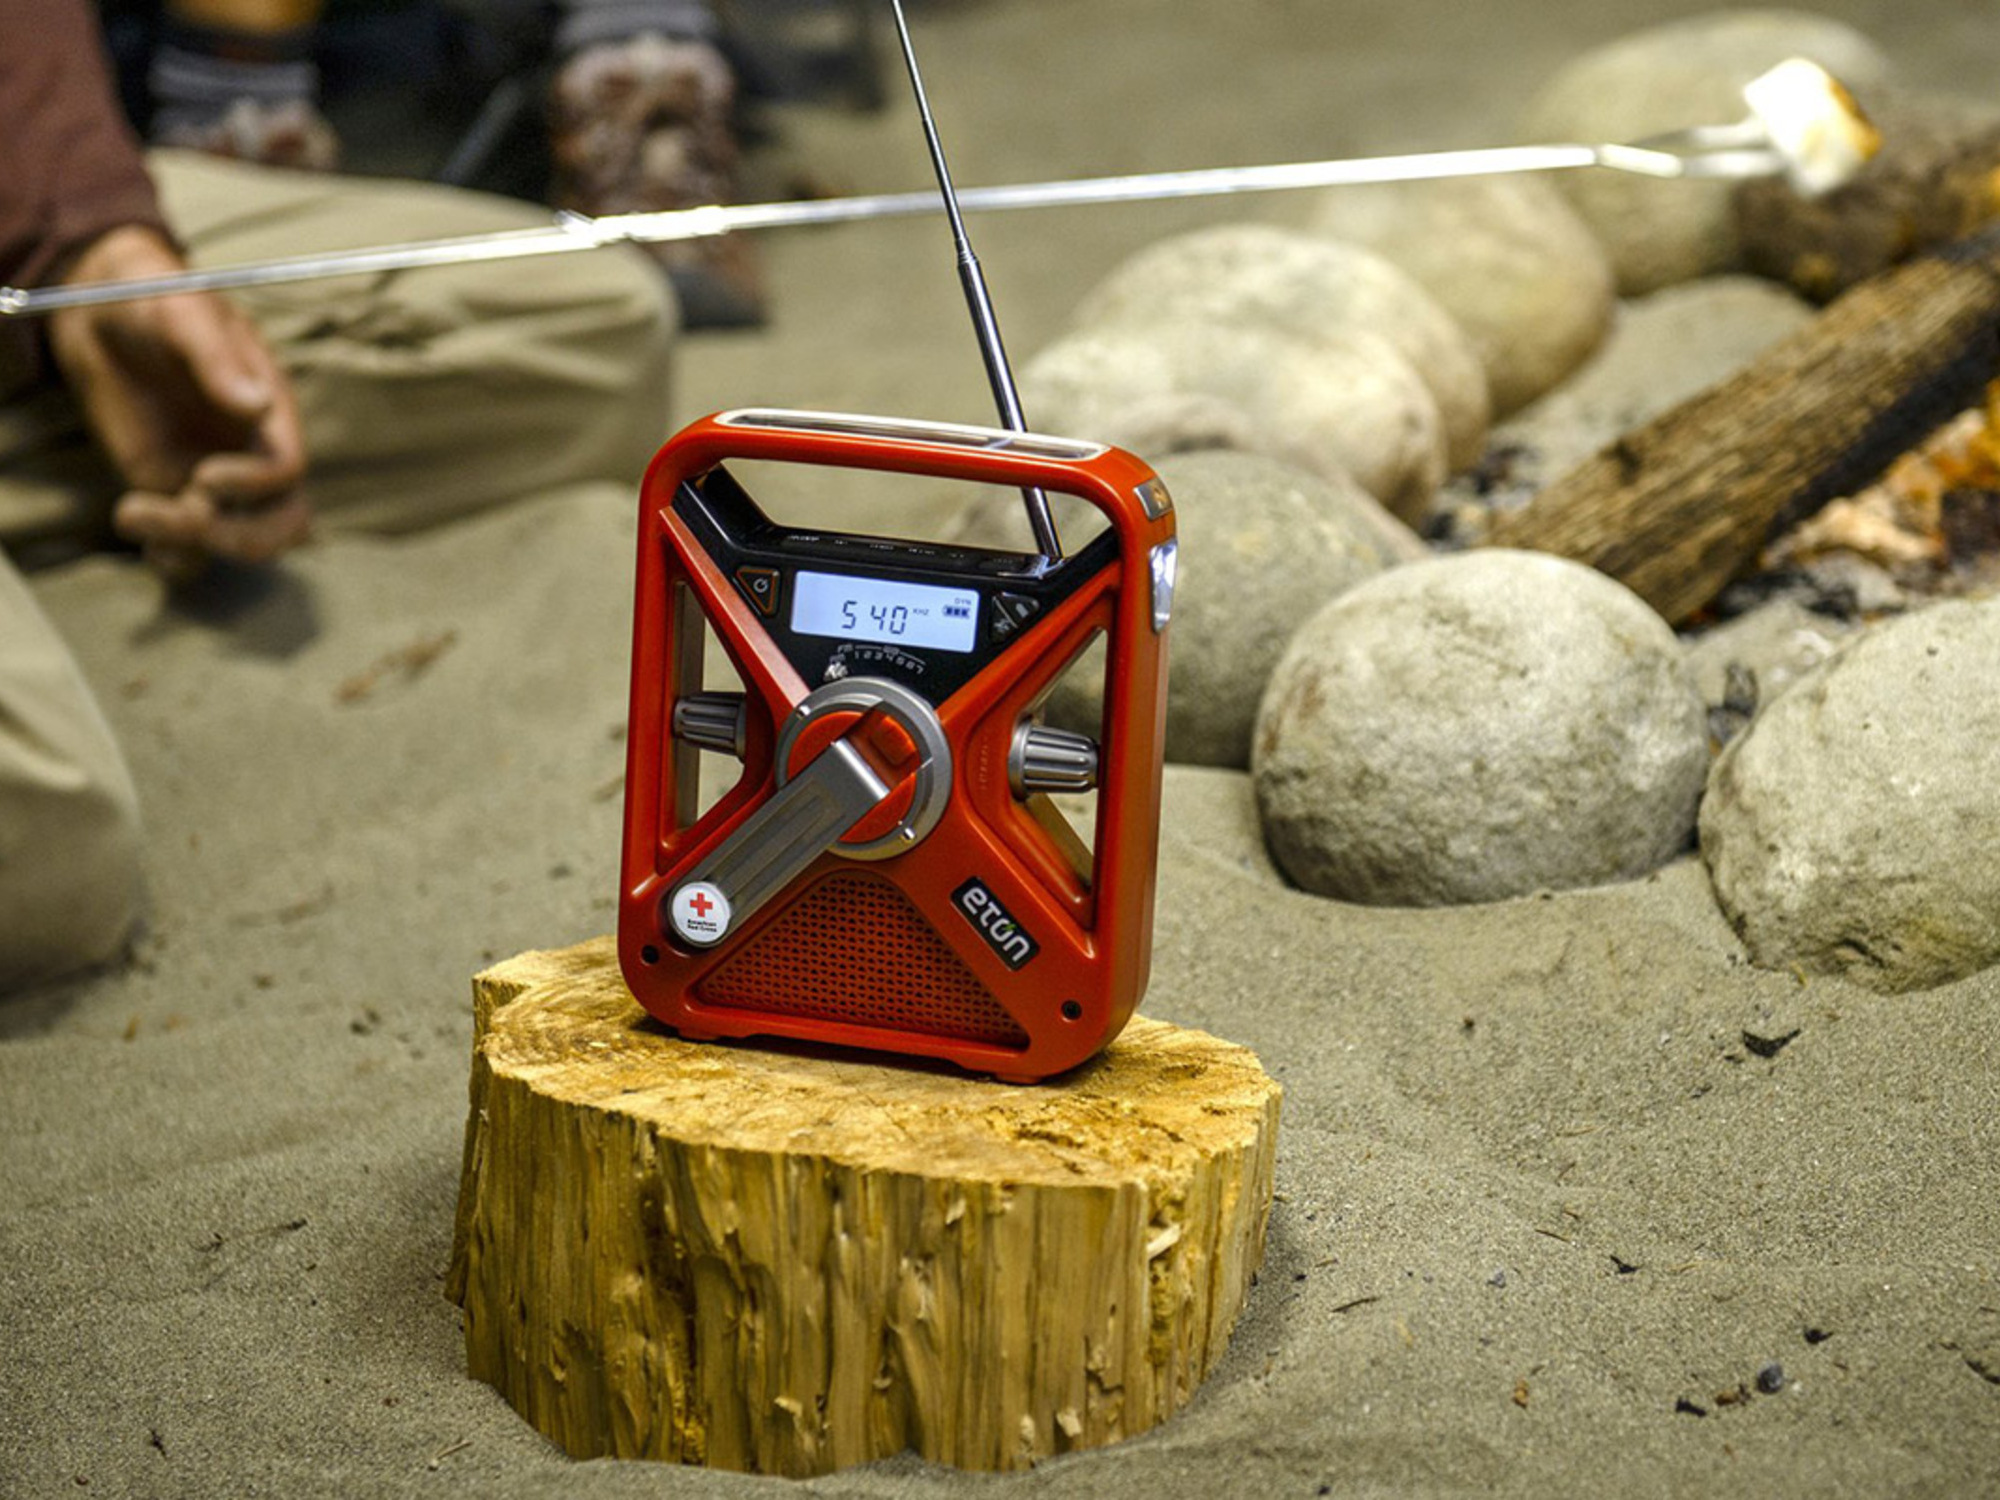 Prepare for disaster with this radio